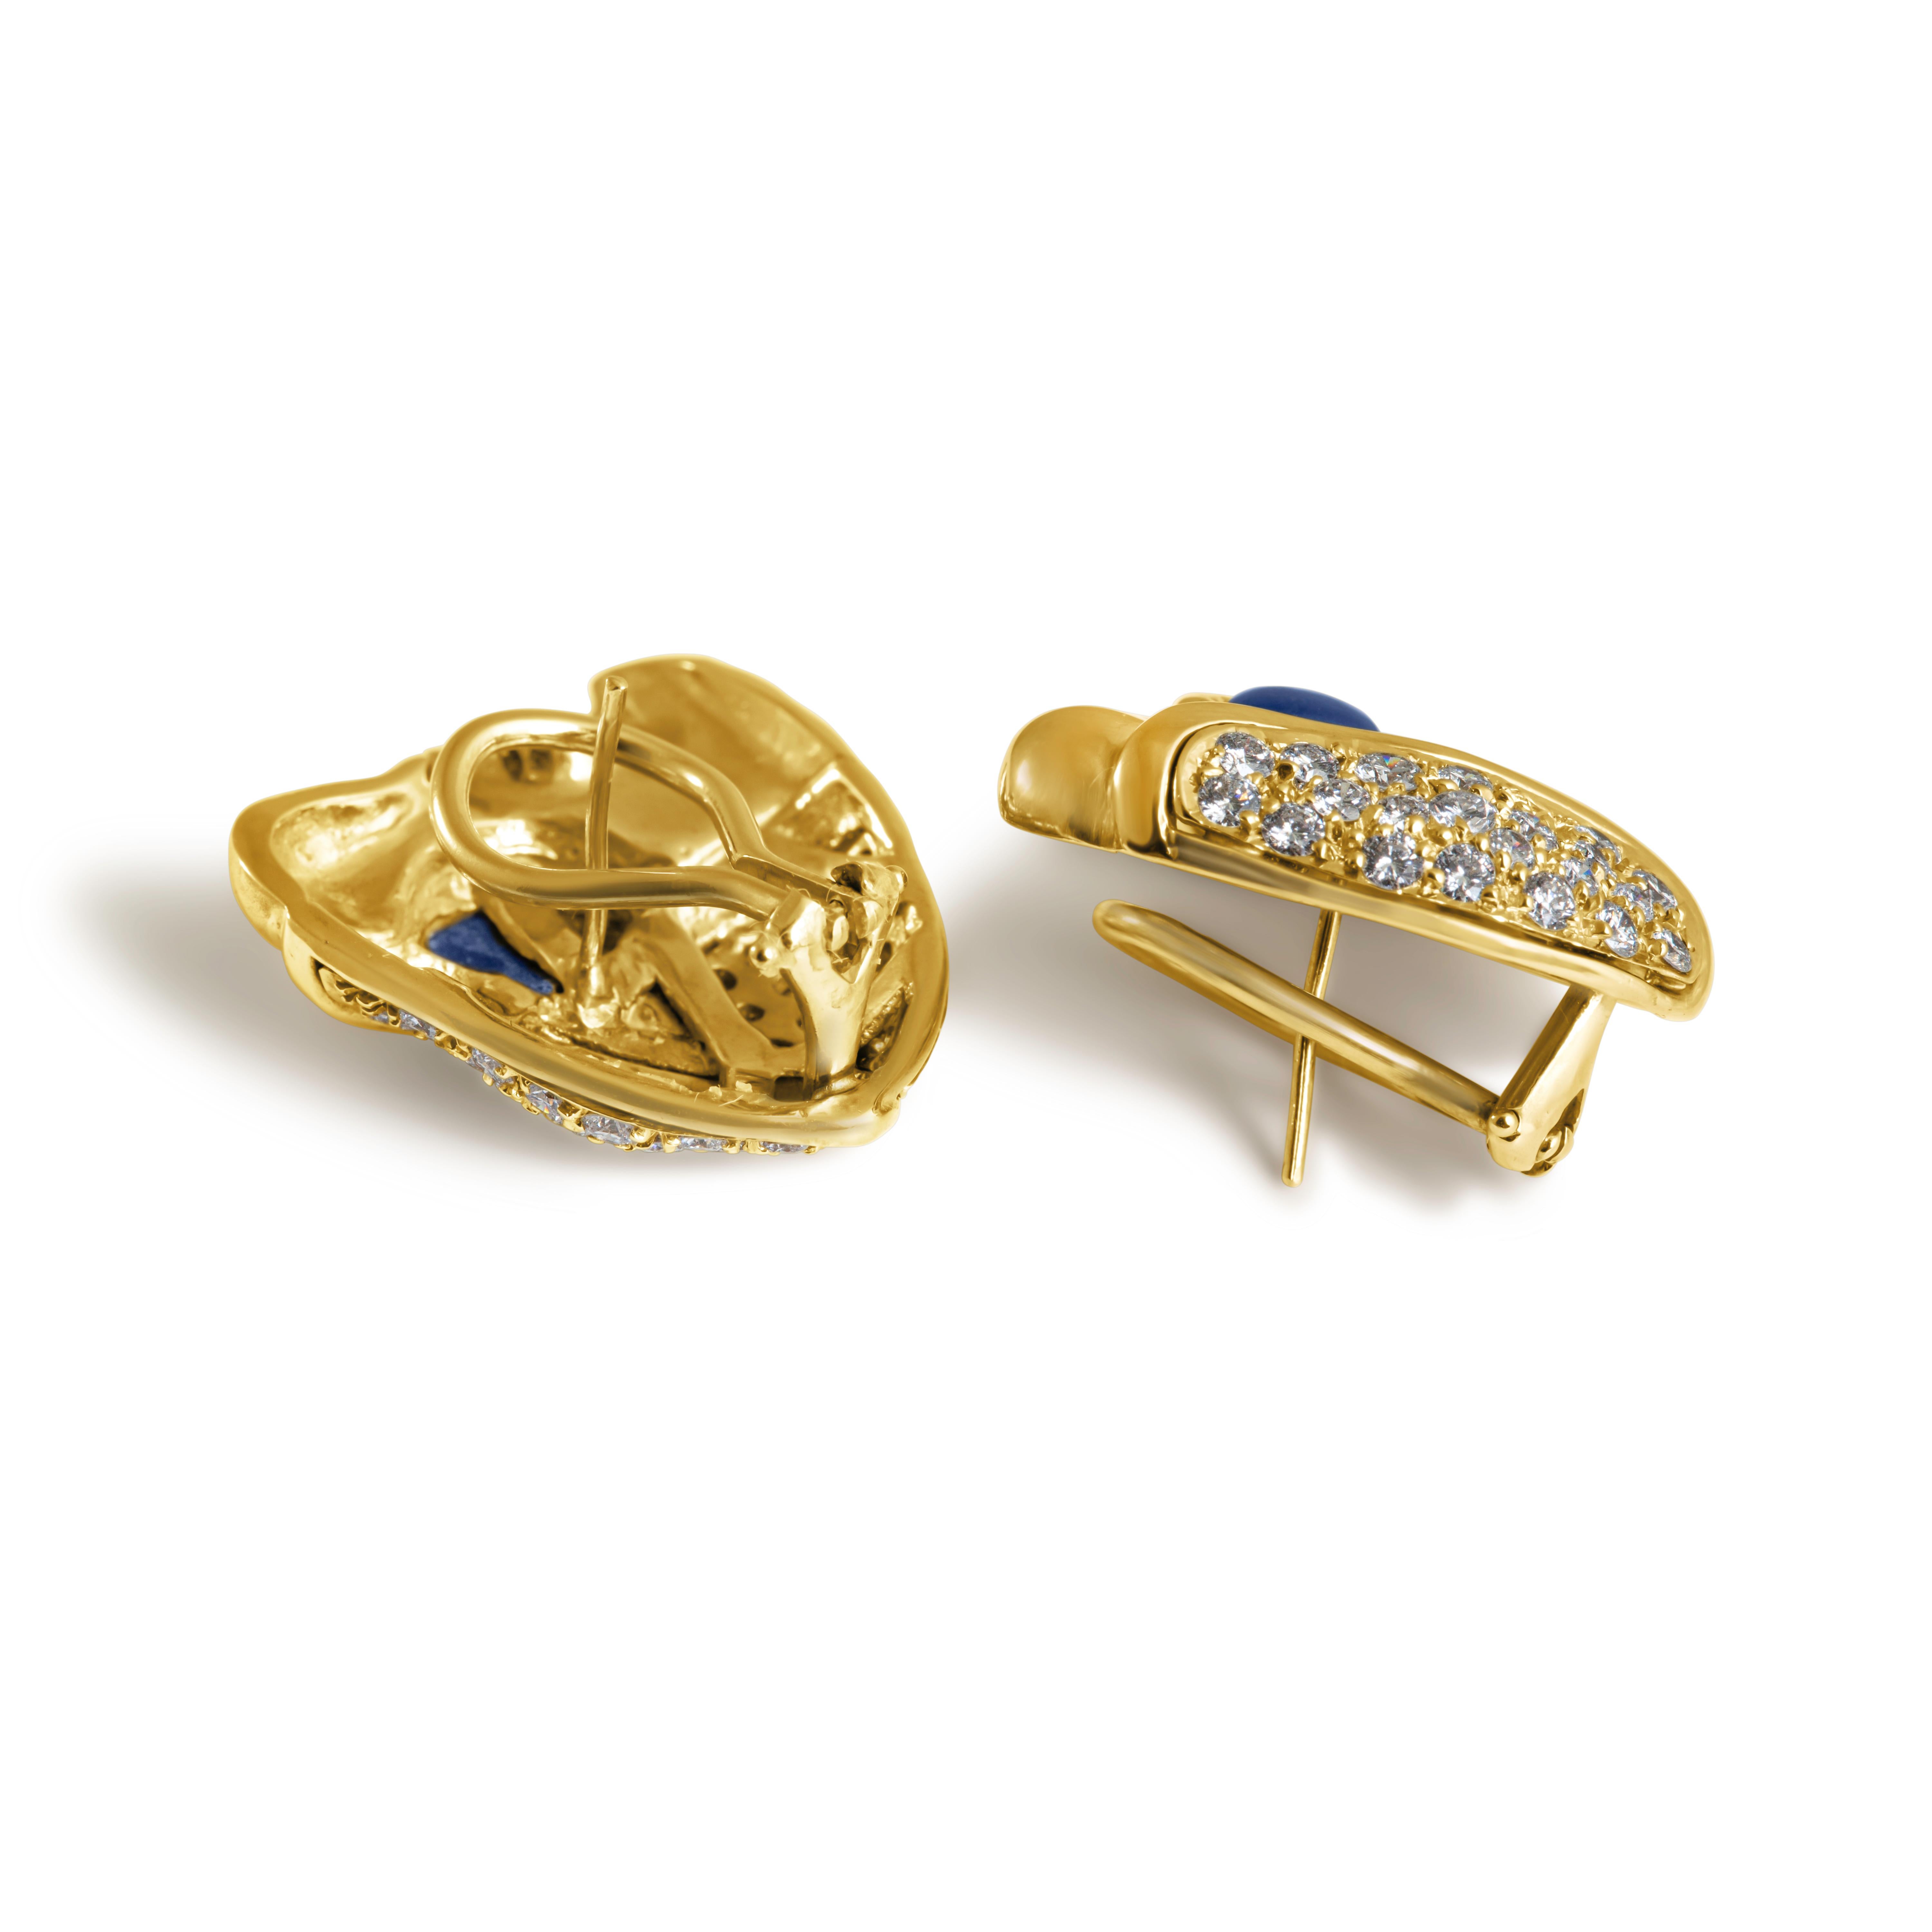 A fabulous estate pair of flower stud earrings with a bold presence and incredible sparkle. Beautifully rendered in gleaming 18ct gold, the earrings feature an abstract lily of the valley in bloom and sit very comfortably on the ear, creating a